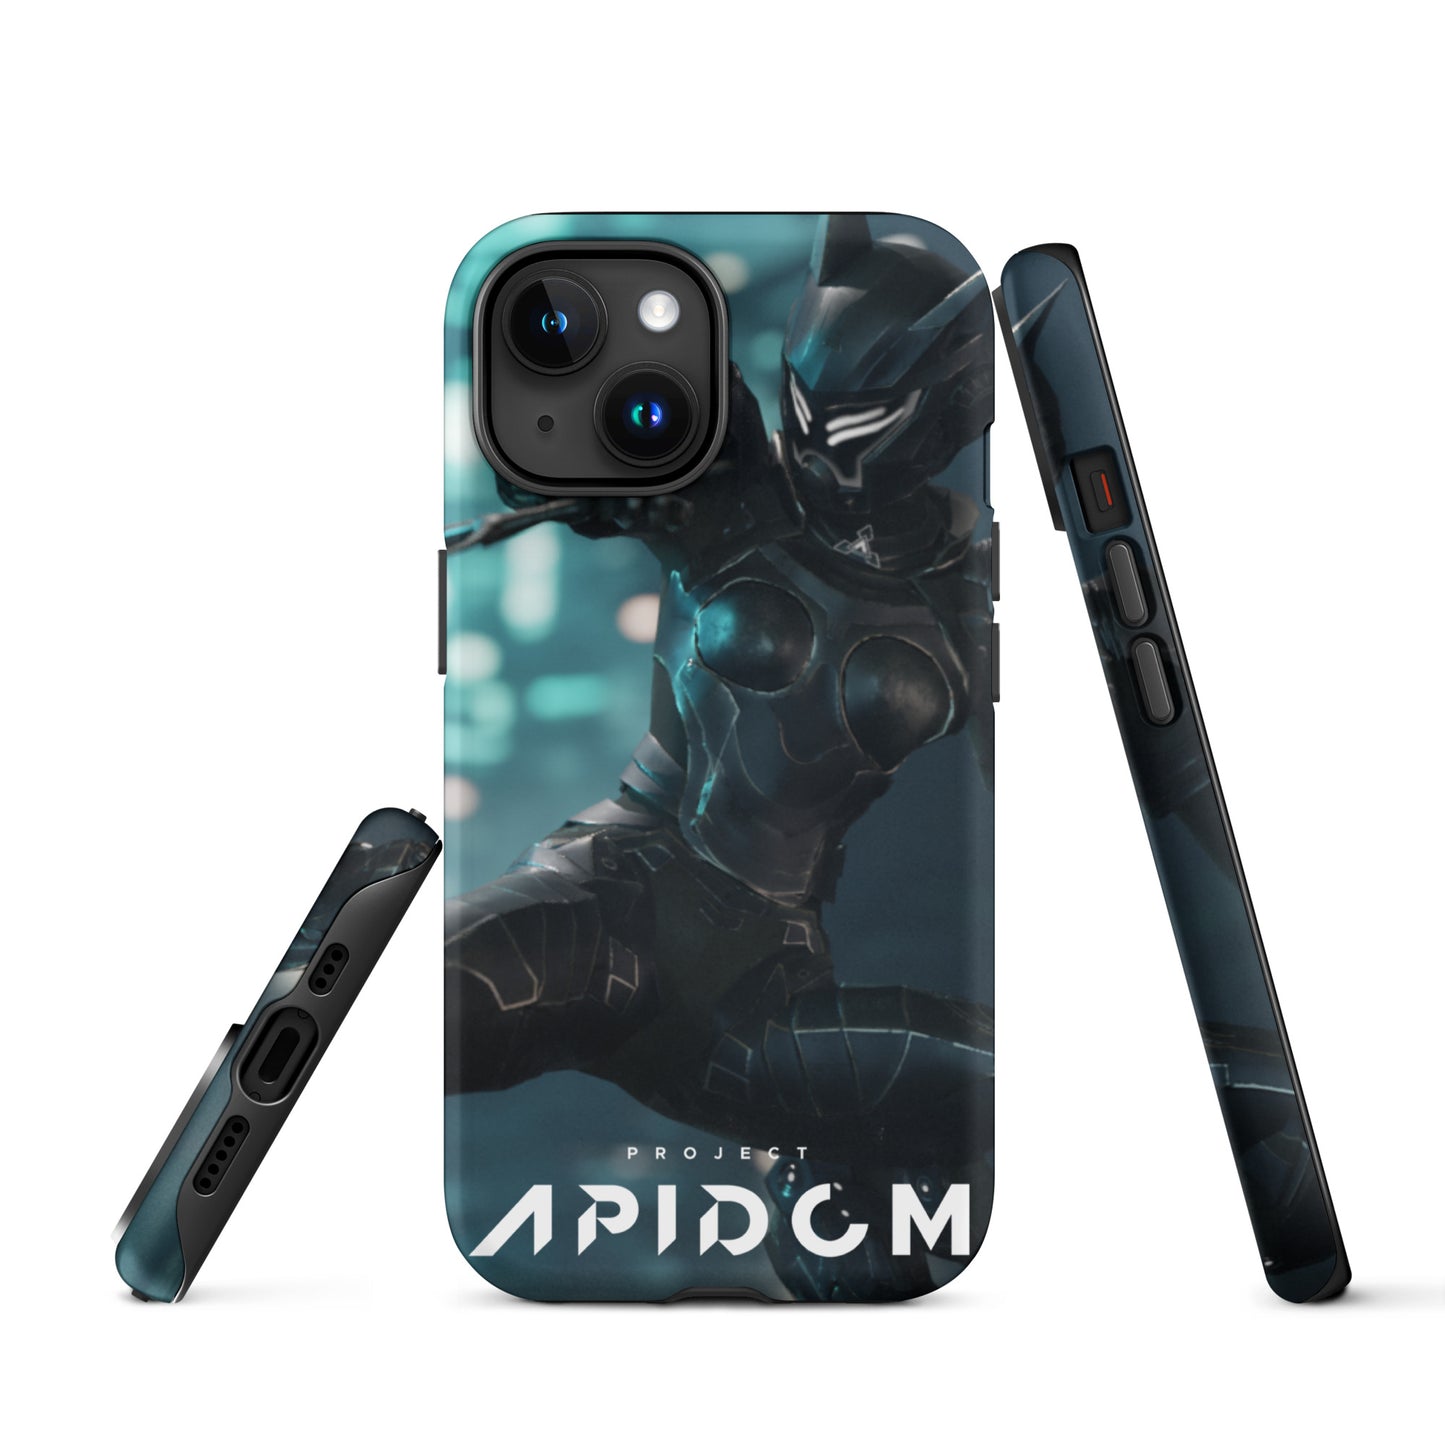 Project Apidom #4 - Tough Case for iPhone®